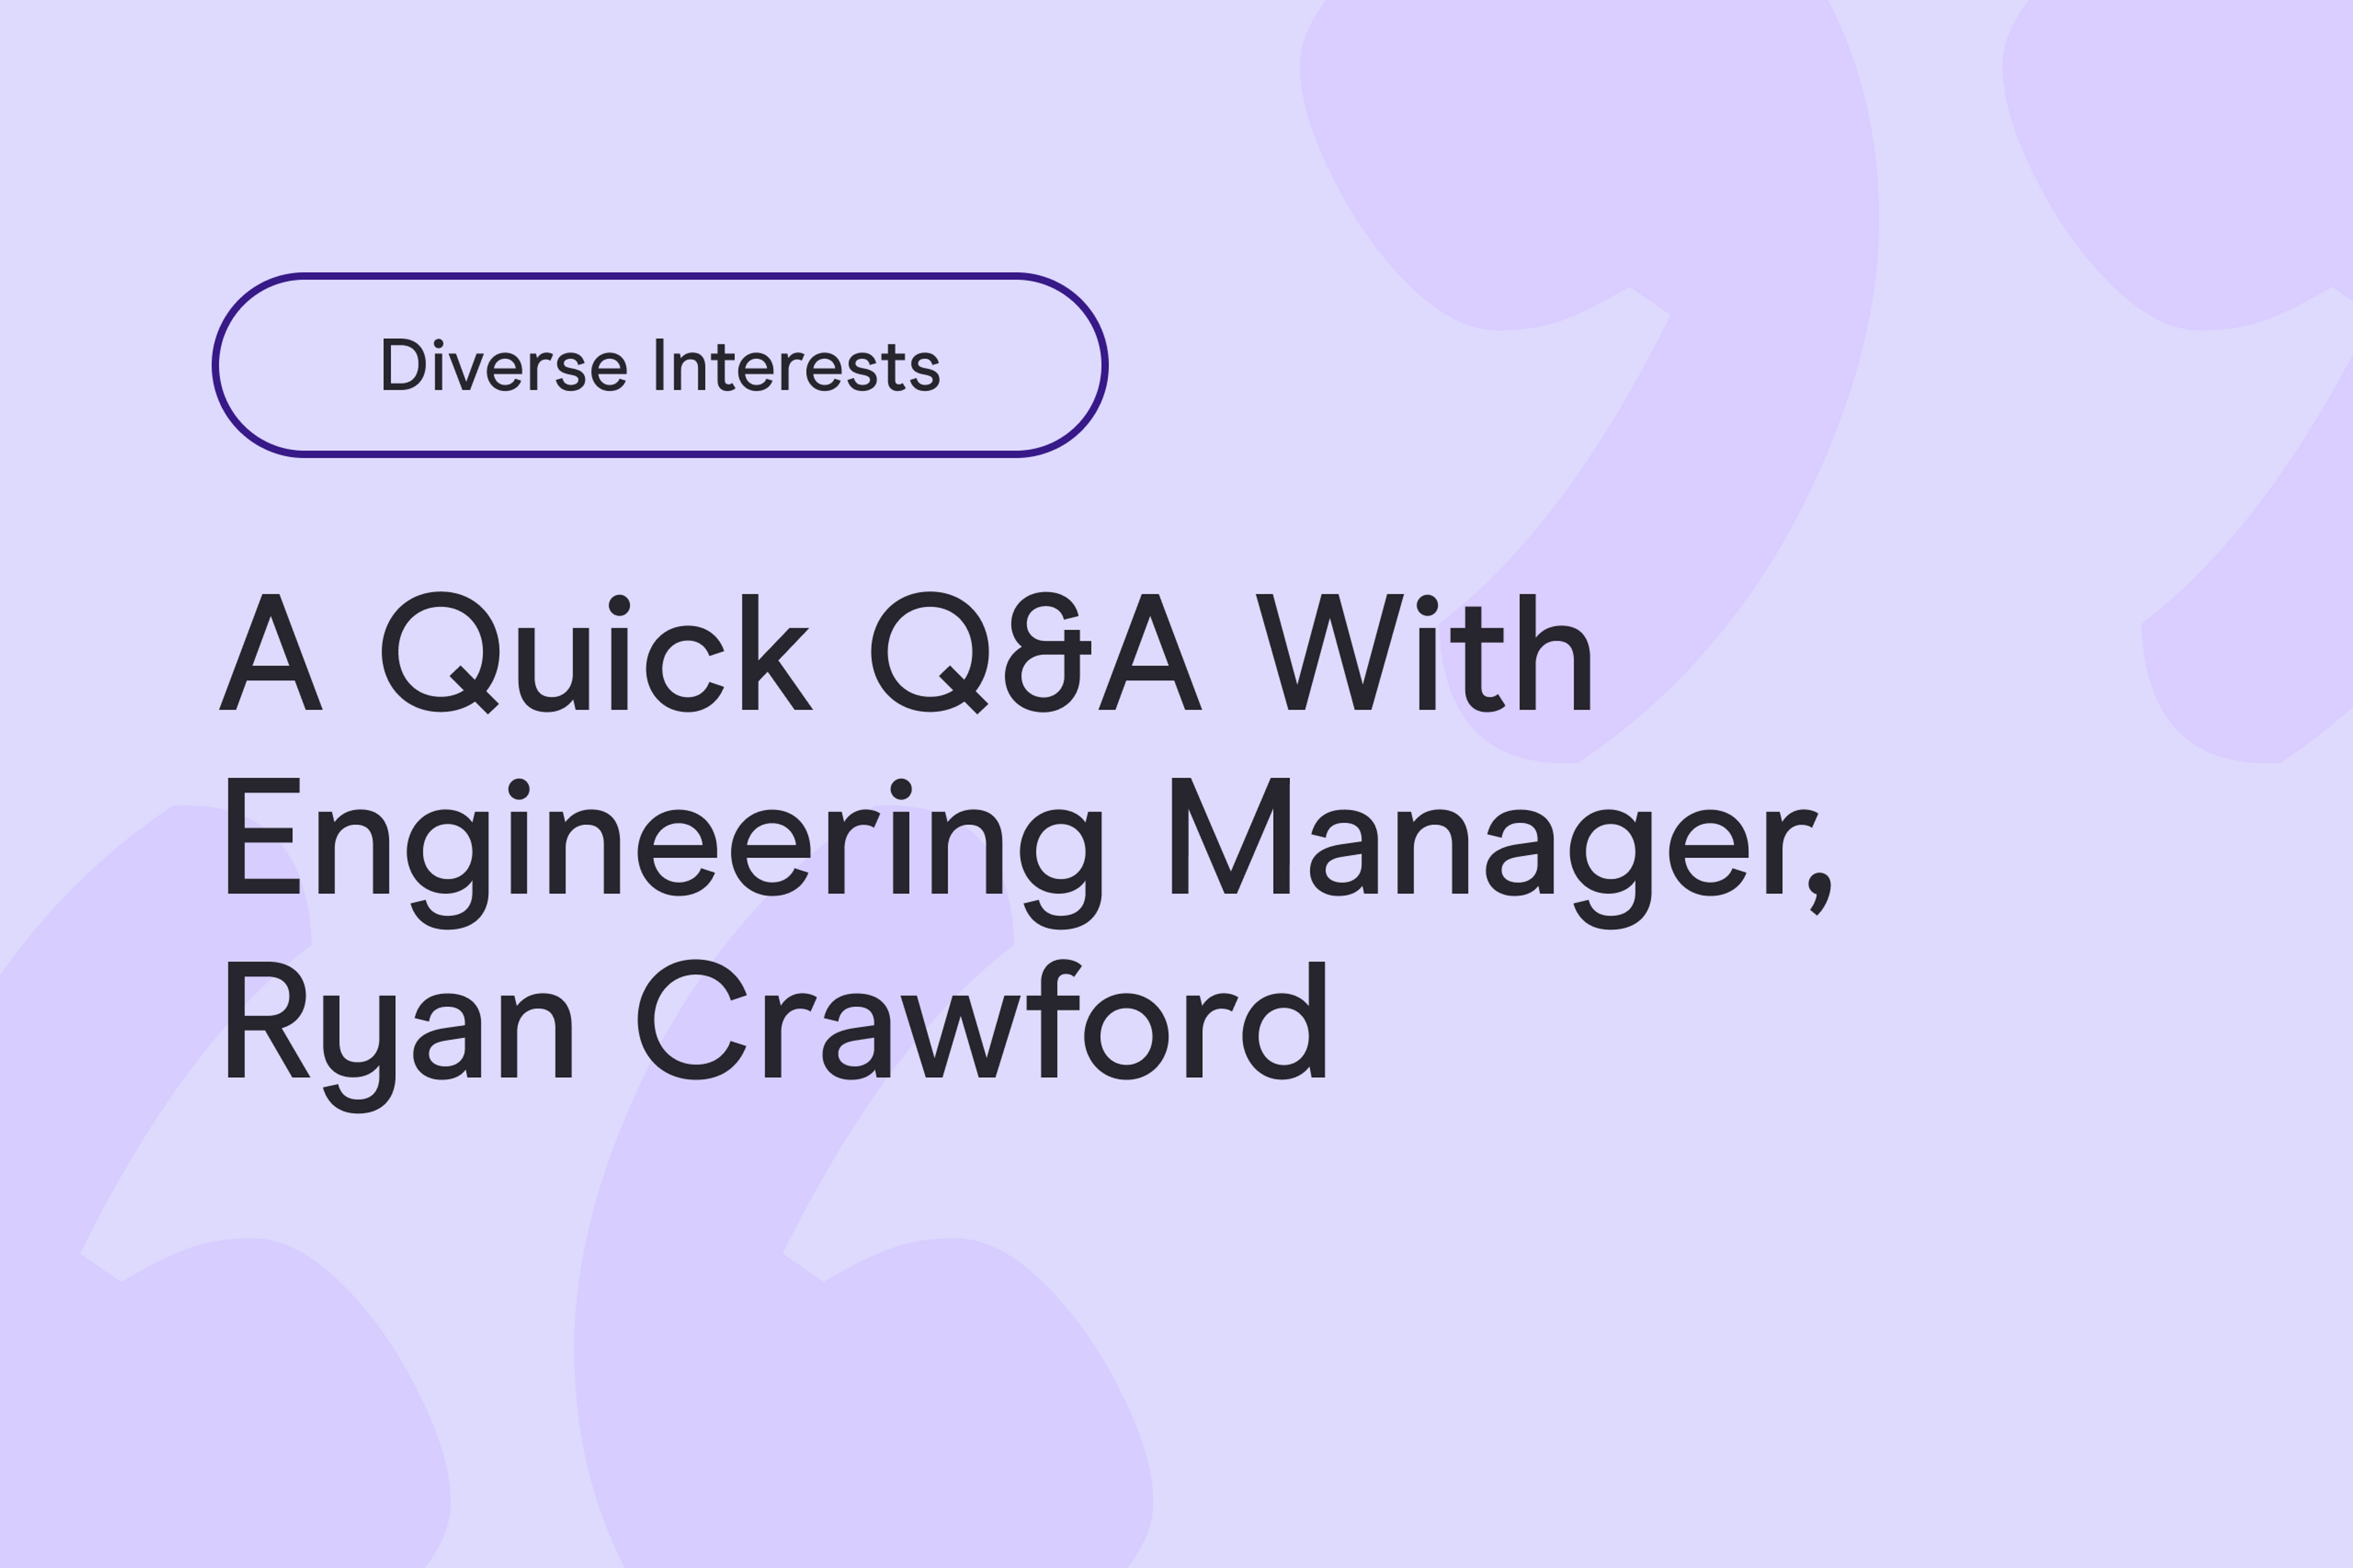 Diverse Interests Outside of Work: a quick Q&A with Engineering Manager, Ryan Crawford